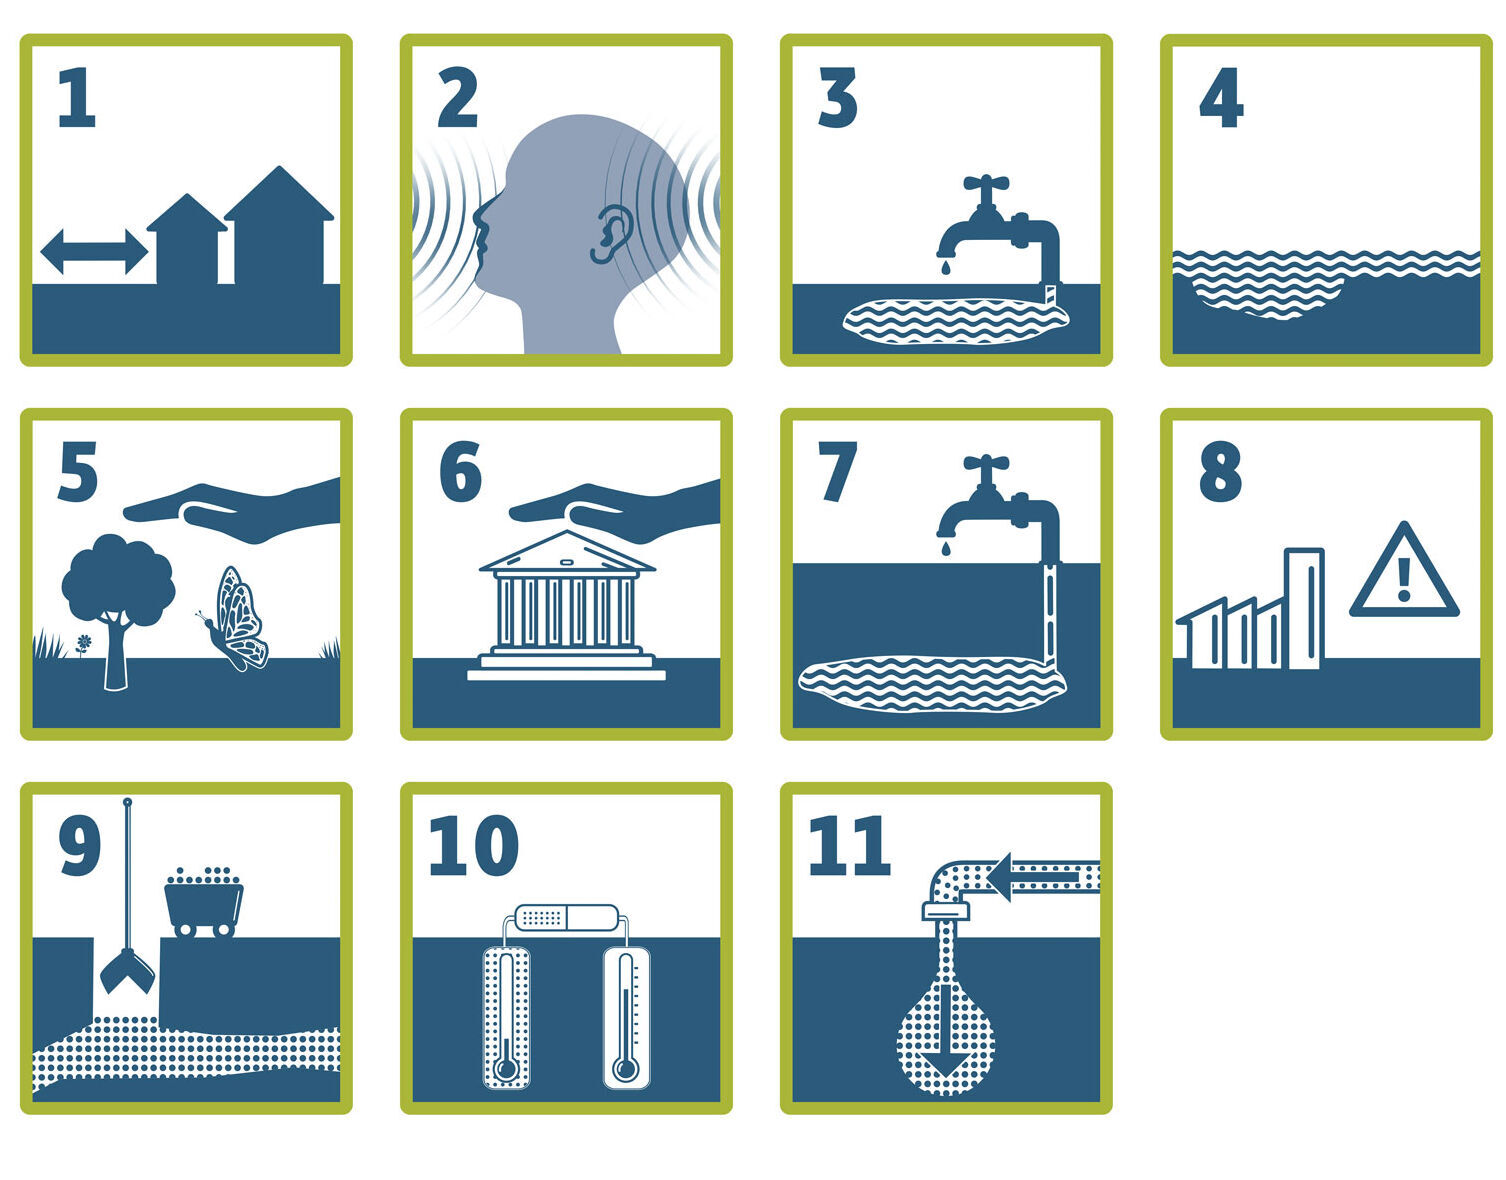 Eleven Icons symbolizing the theoretical planning consideration criteria